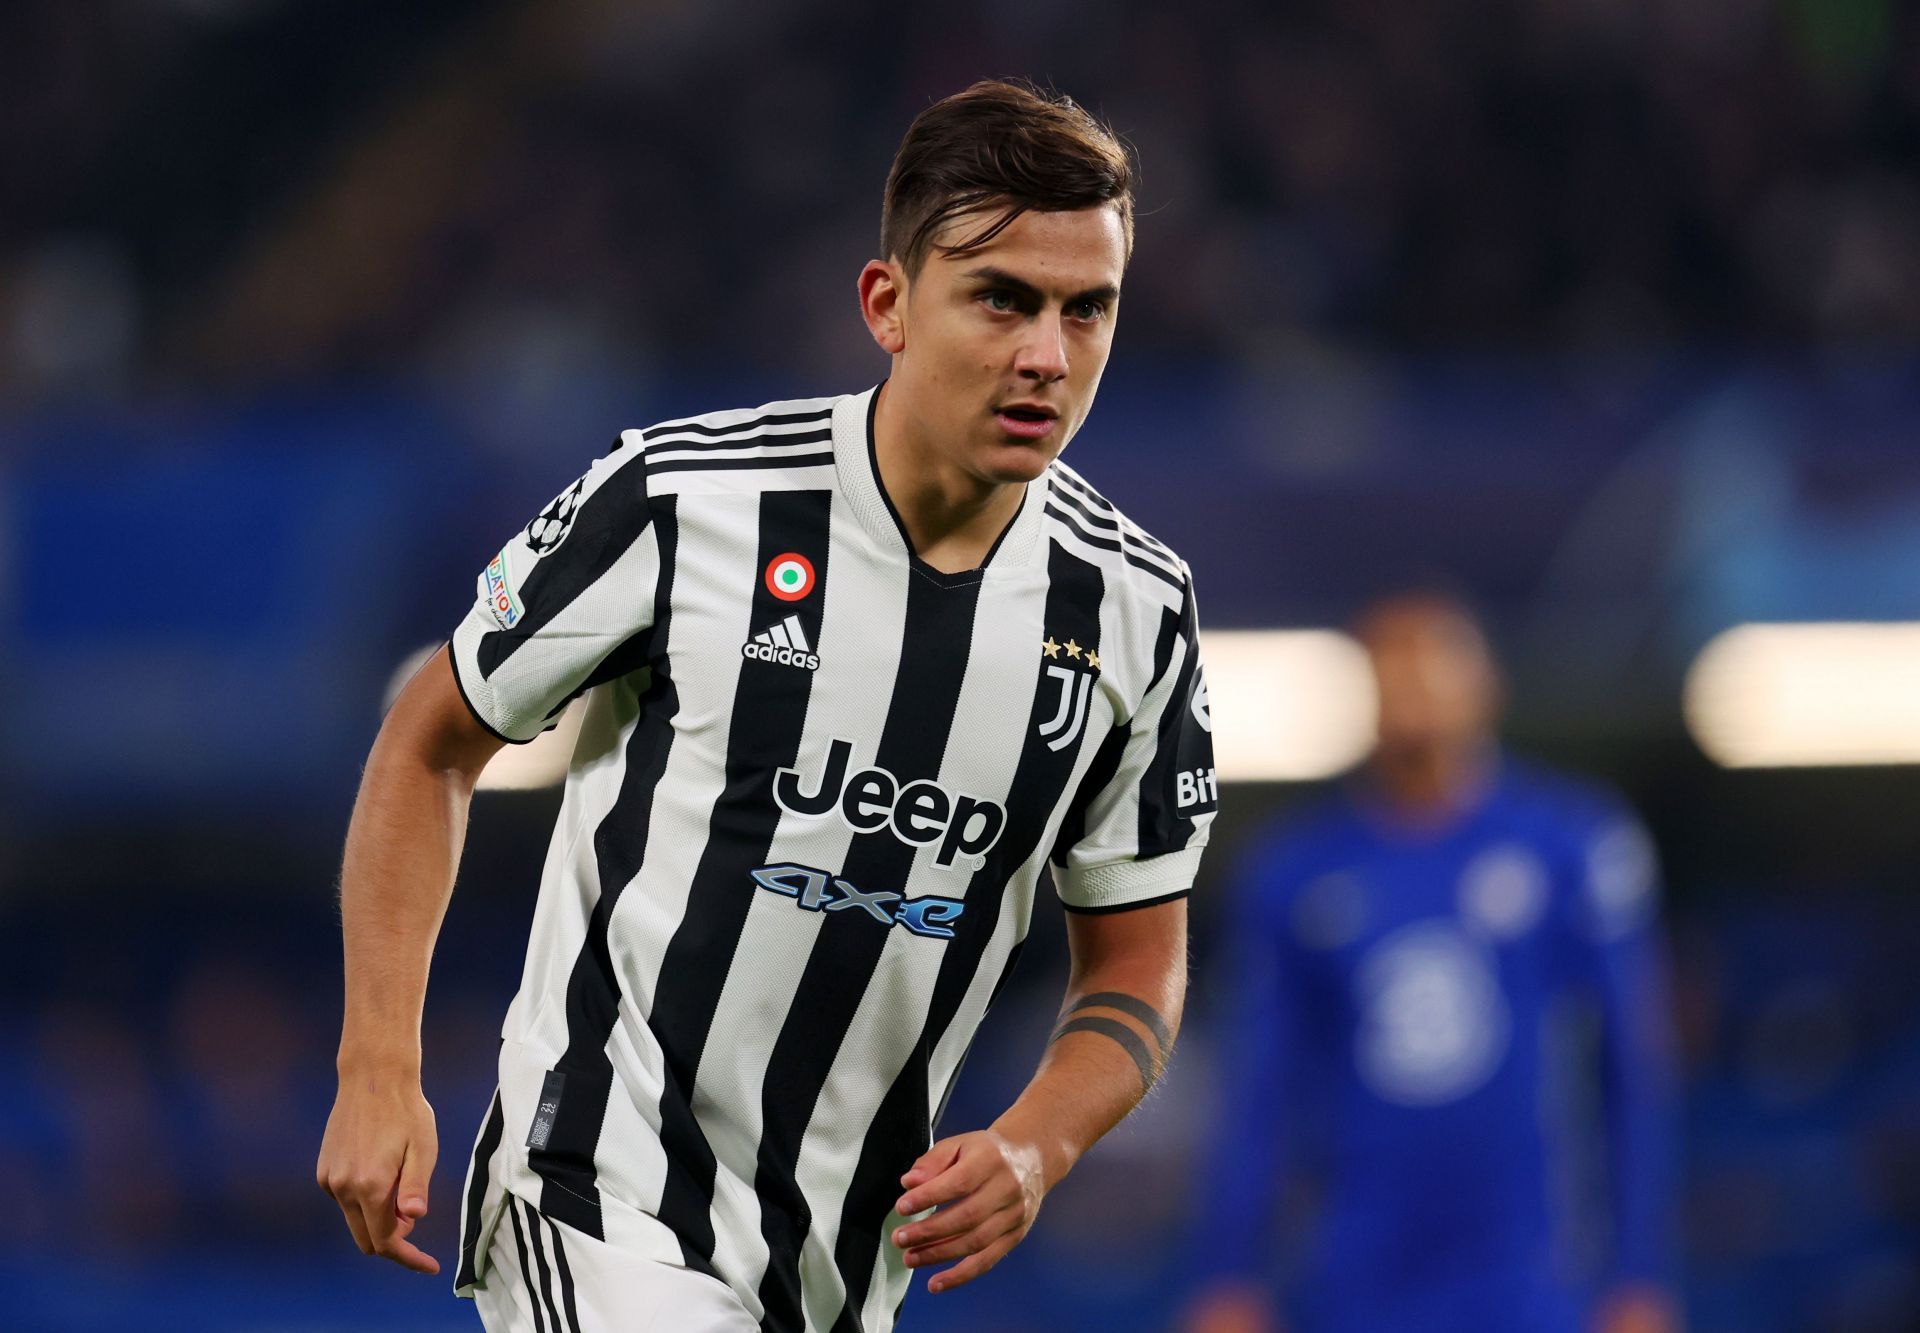 Paulo Dybala has been in good form for Juventus